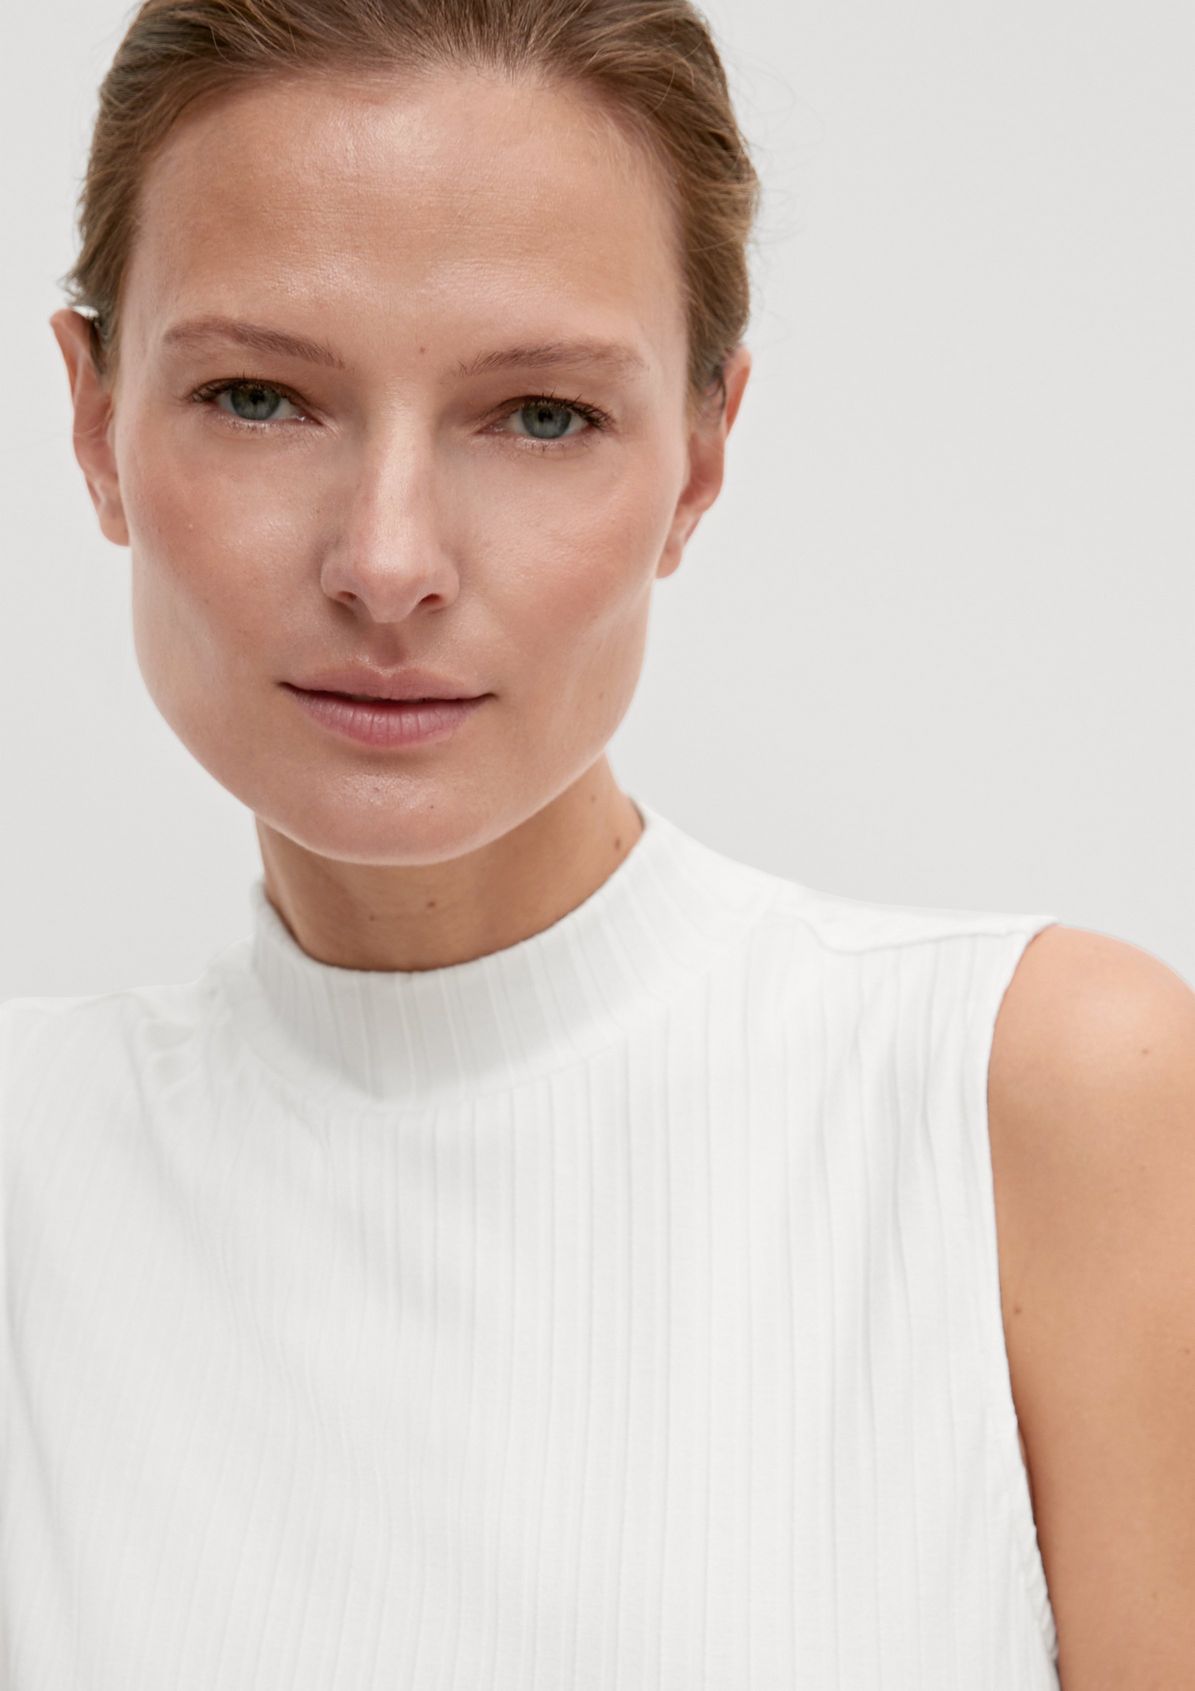 Sleeveless top with a stand-up collar from comma